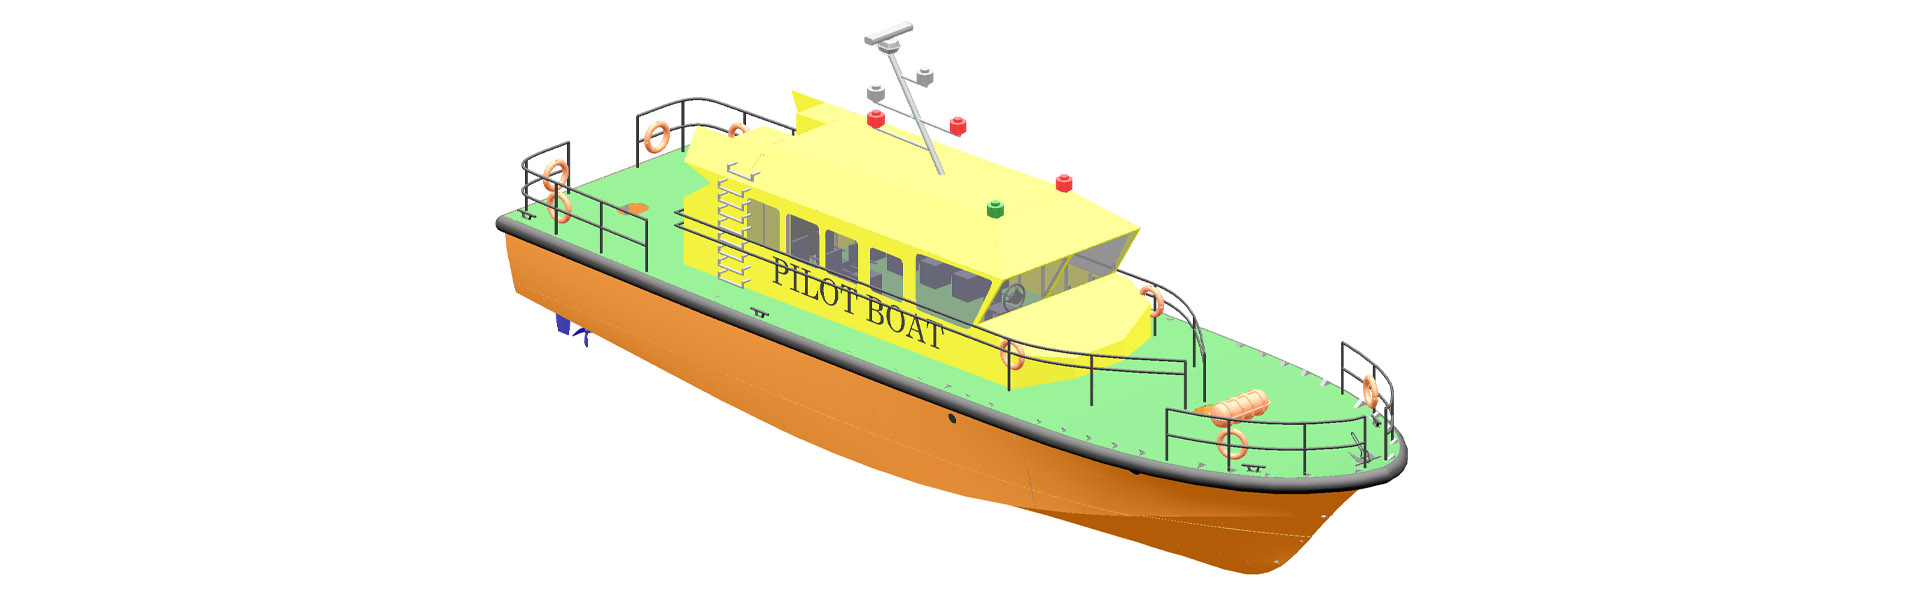 Perspective view of the 3D model of a Pilot Boat designed entirely at Conceptia.